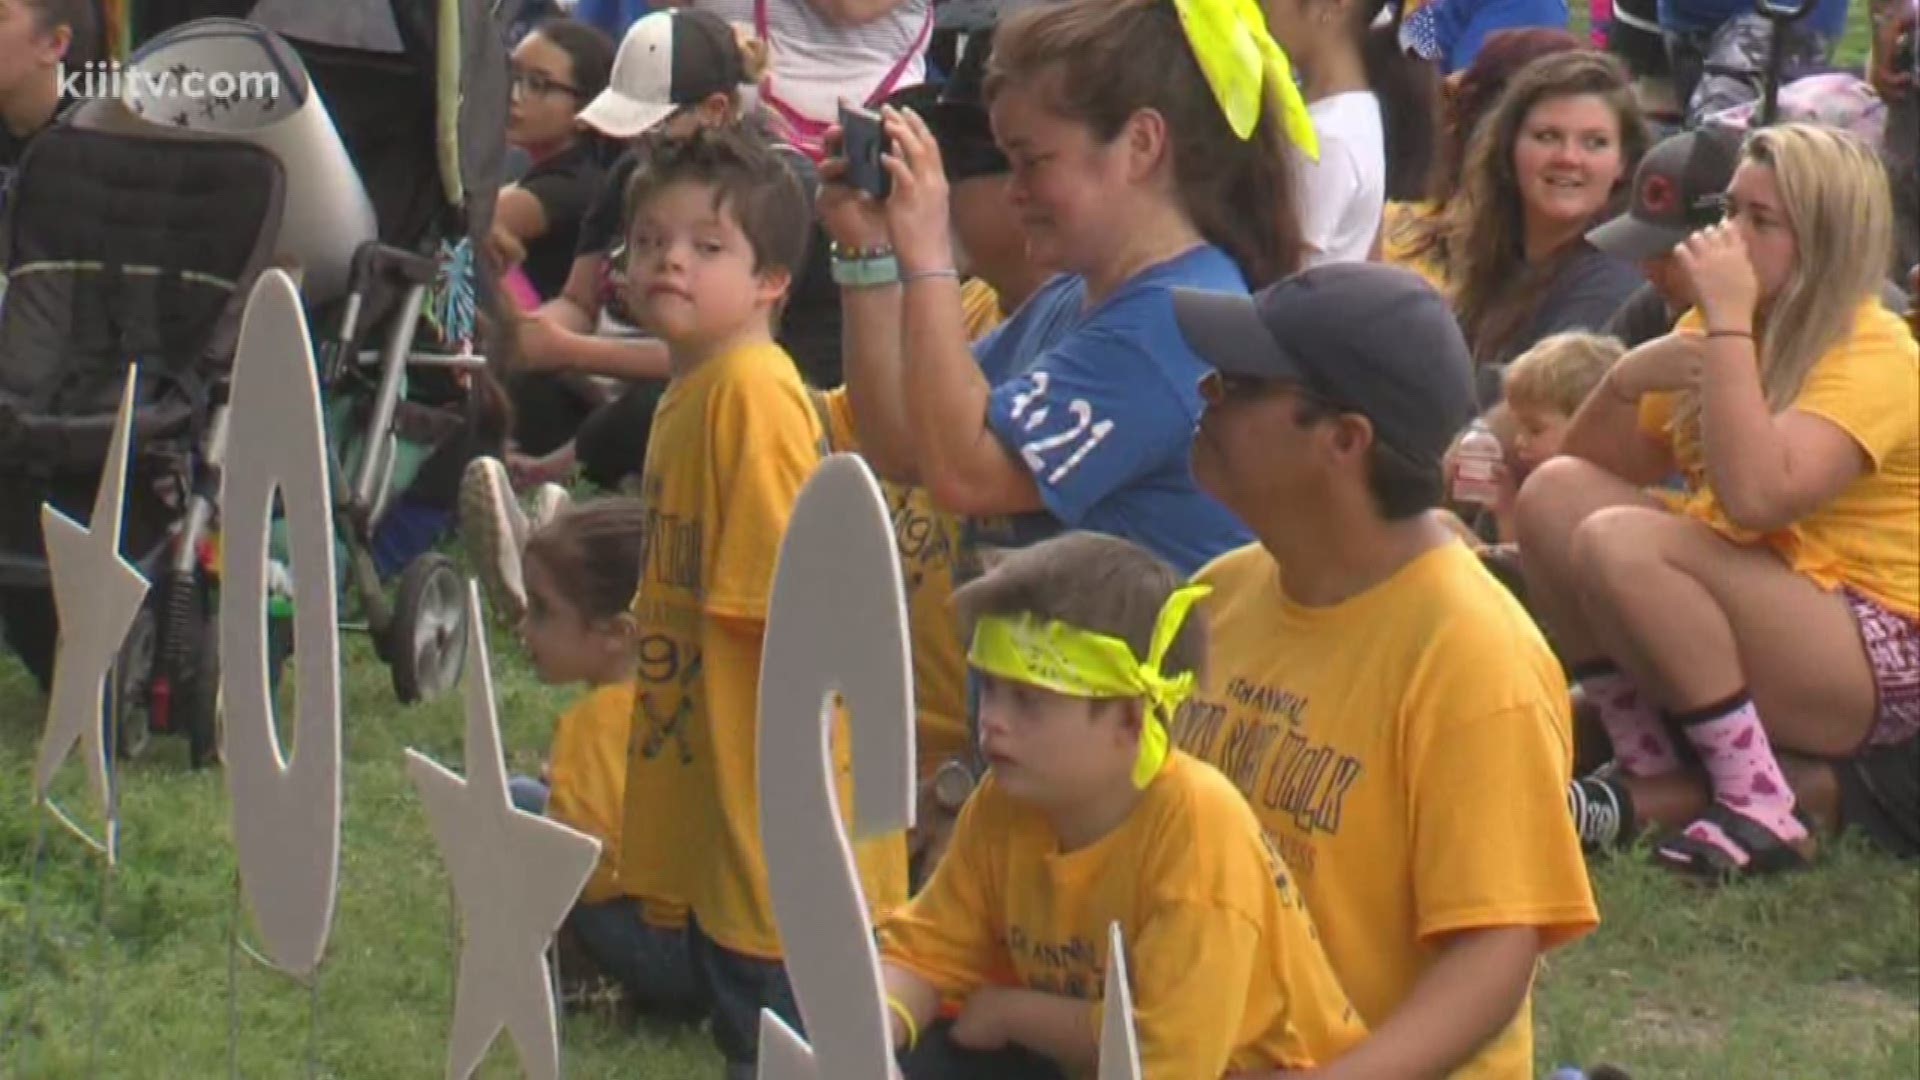 The walk promotes Down syndrome awareness and research